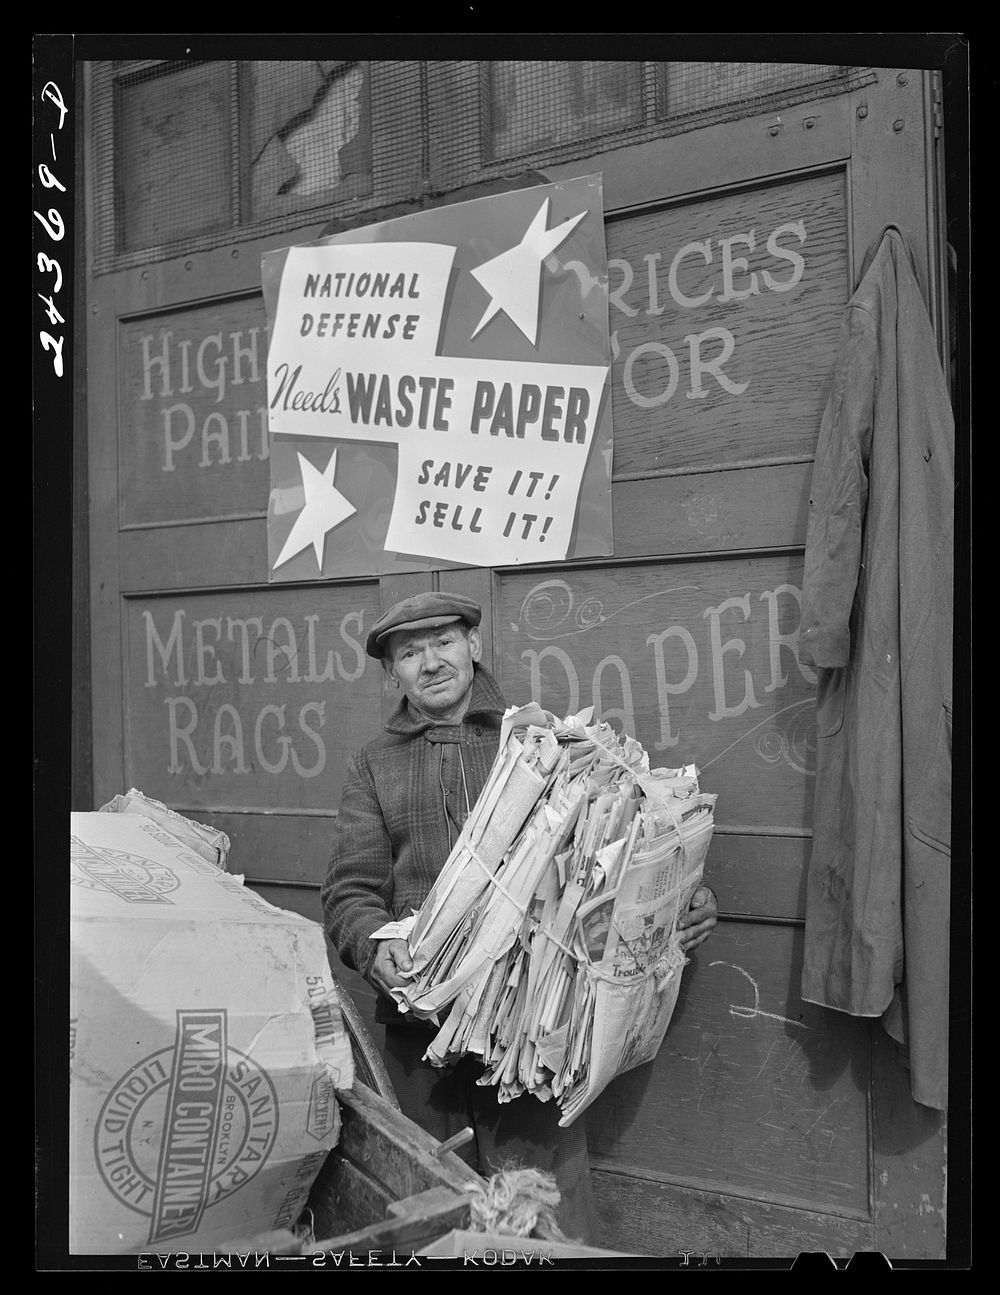 Junk man. New York City. Sourced from the Library of Congress.